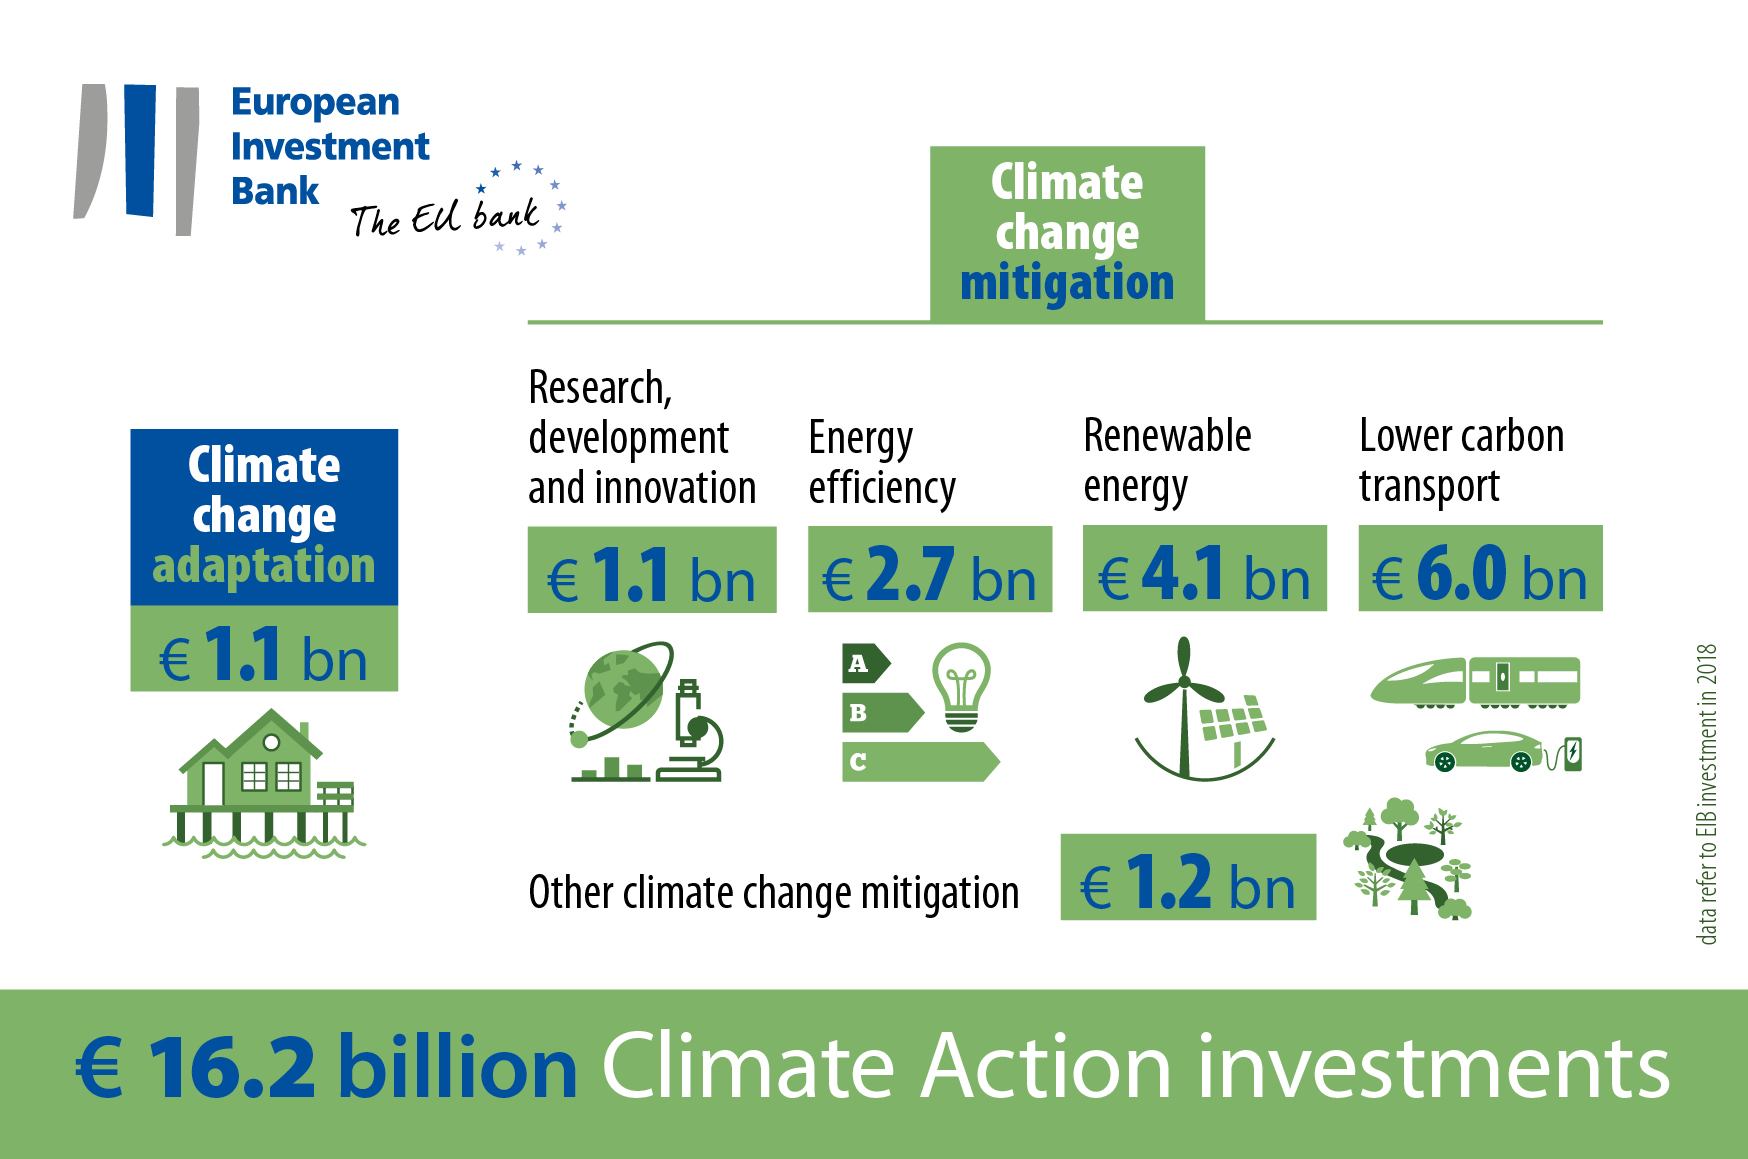 In 2017 the EIB financed EUR 19.4bn of climate action